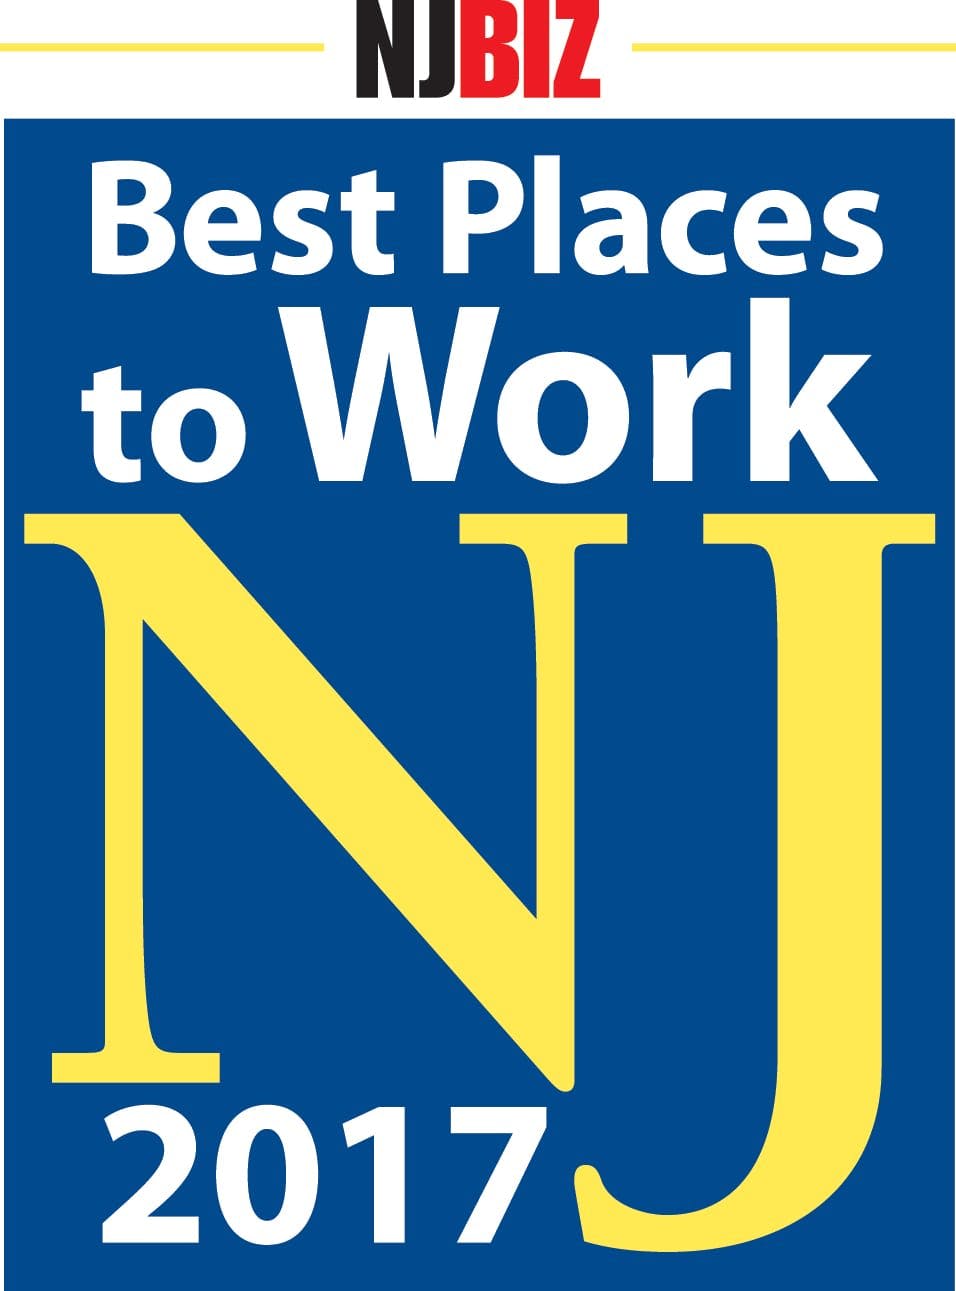 Scarinci Hollenbeck Attorneys at Law is chosen as one of NJBiz’s and Best Companies Group’s 2017 Best Places to Work in New Jersey List